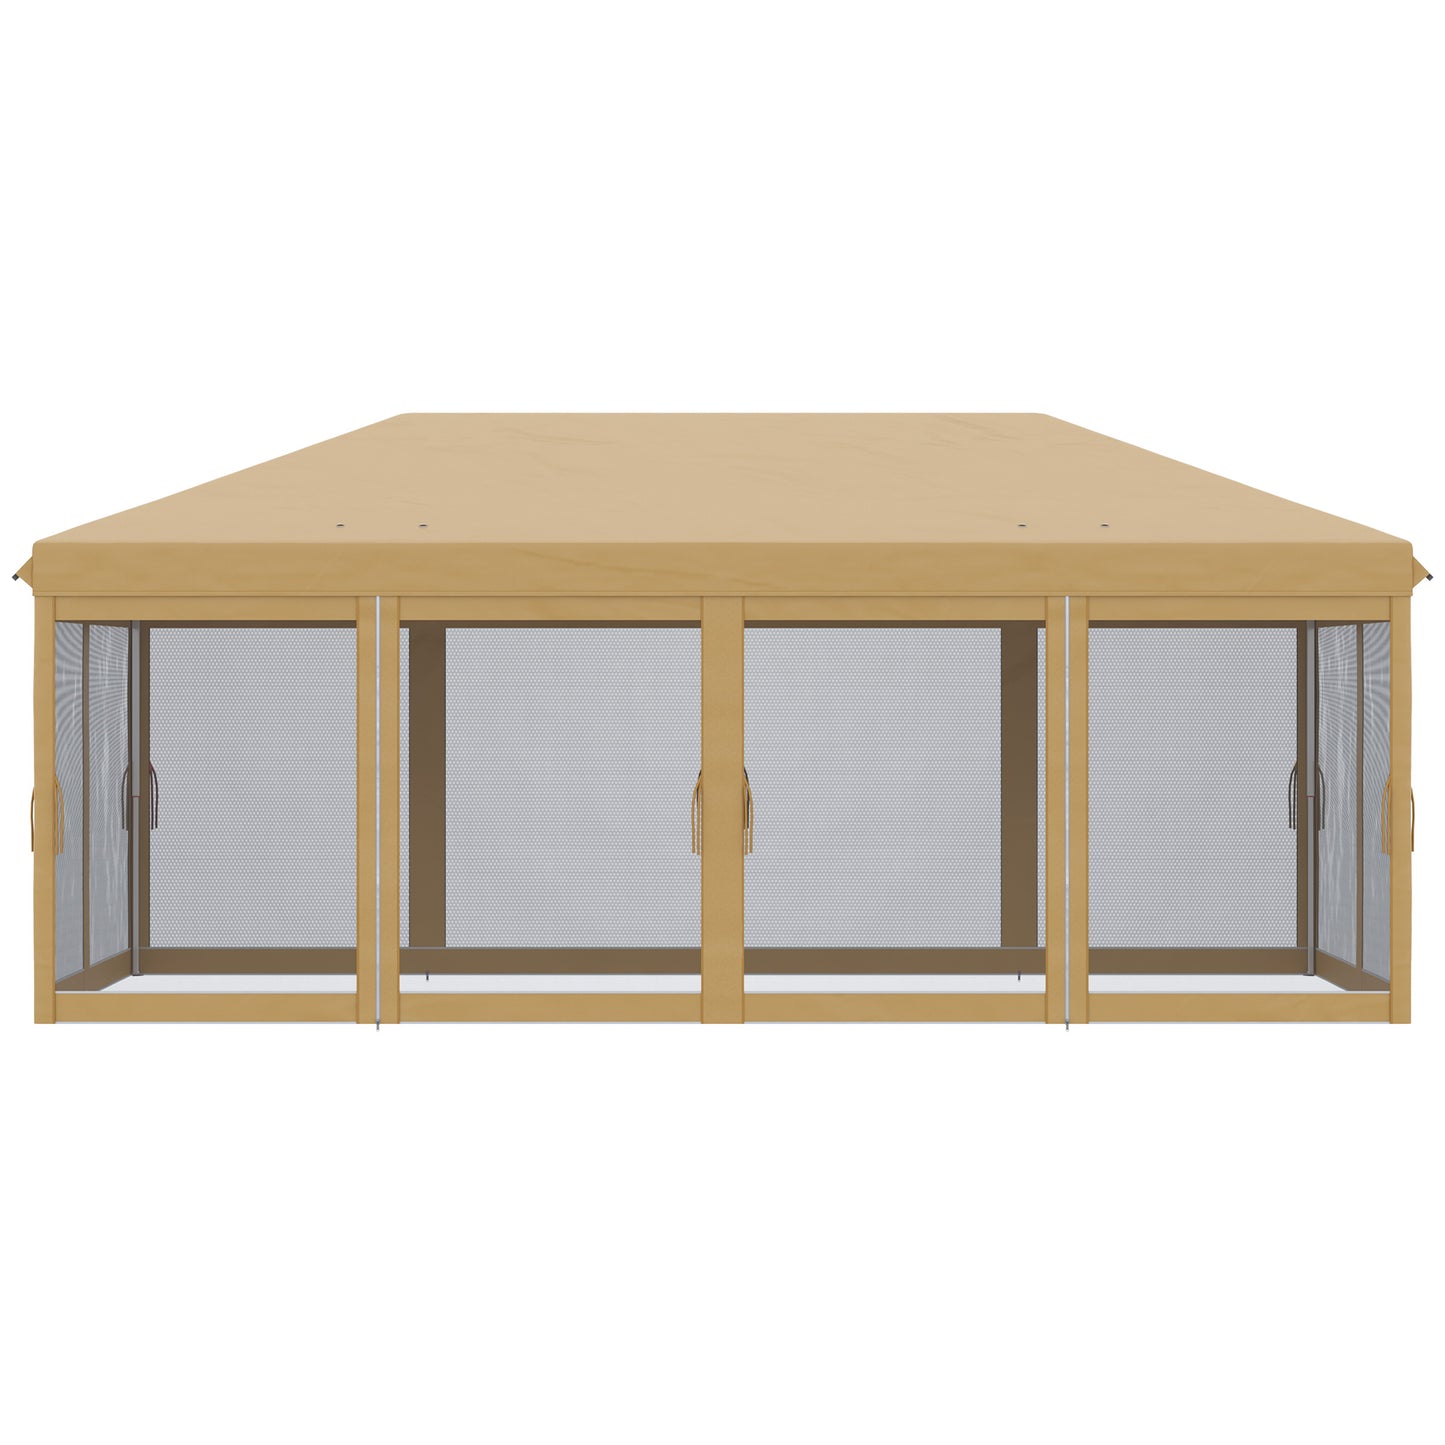 Outsunny 6 x 3(m) Pop Up Gazebo, Outdoor Canopy Shelter, Marquee Party Wedding Tent with 6 Mesh Walls and Carry Bag, Beige